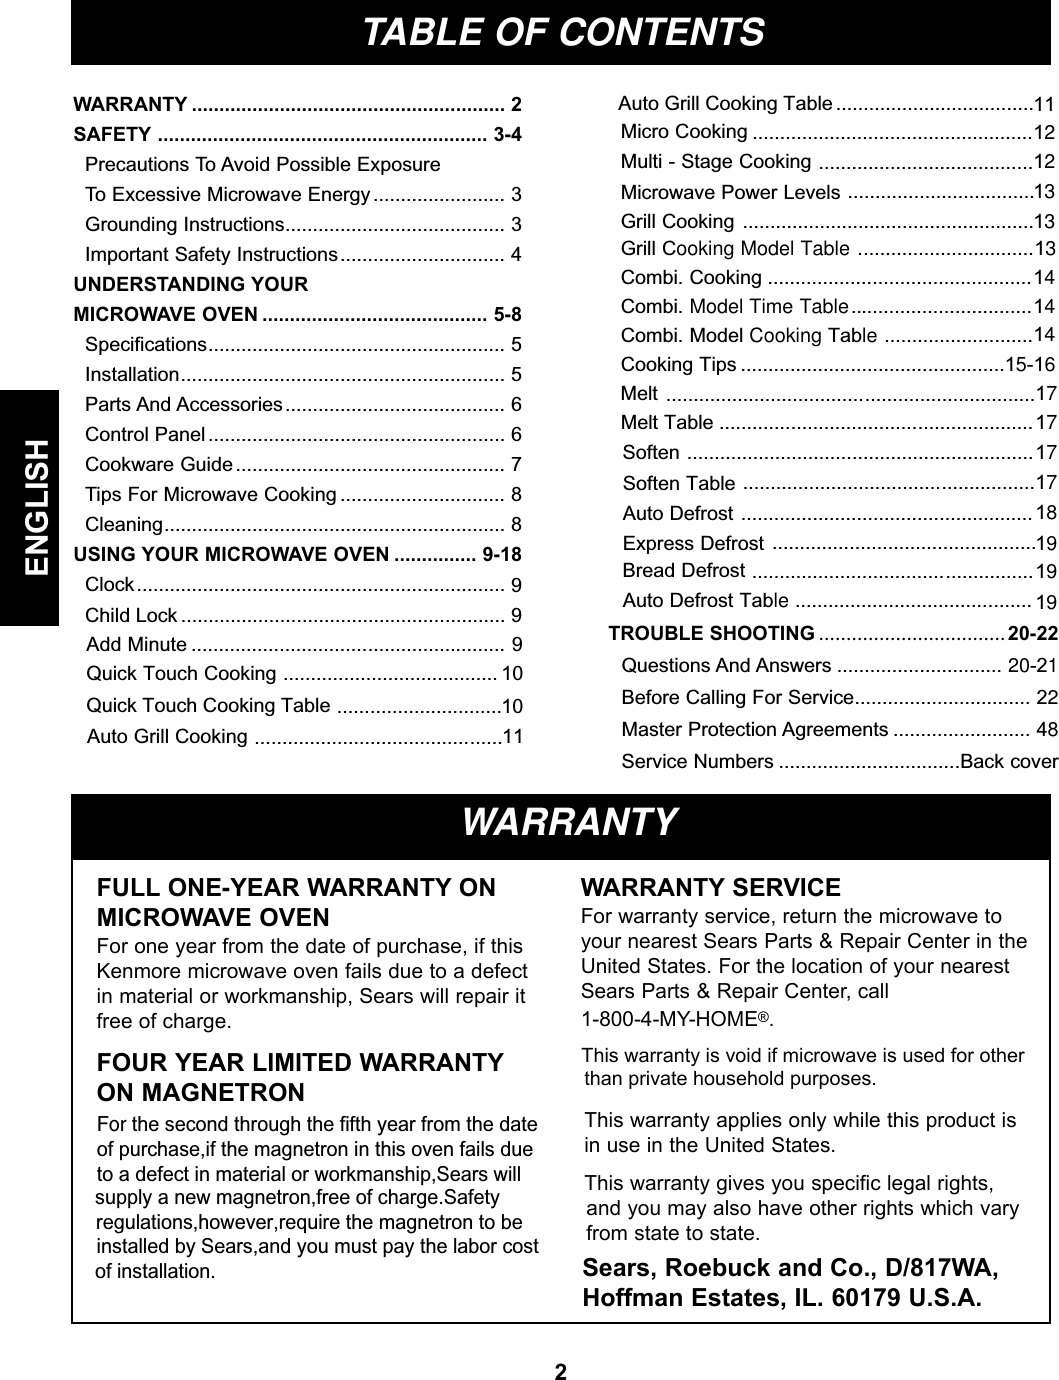 2ENGLISHTABLE OF CONTENTSWARRANTYFULL ONE-YEAR WARRANTY ONMICROWAVE OVENFor one year from the date of purchase, if thisKenmore microwave oven fails due to a defectin material or workmanship, Sears will repair itfree of charge.For the second through the fifth year from the dateof purchase,if the magnetron in this oven fails dueto a defect in material or workmanship,Sears willsupply a new magnetron,free of charge.Safetyregulations,however,require the magnetron to be installed by Sears,and you must pay the labor costof installation.This warranty applies only while this product isin use in the United States.This warranty gives you specific legal rights,and you may also have other rights which varyfrom state to state.WARRANTY SERVICE For warranty service, return the microwave toyour nearest Sears Parts &amp; Repair Center in theUnited States. For the location of your nearestSears Parts &amp; Repair Center, call 1-800-4-MY-HOME®.This warranty is void if microwave is used for otherthan private household purposes.Sears, Roebuck and Co., D/817WA,Hoffman Estates, IL. 60179 U.S.A.WFOUR YEAR LIMITED WARRANTYON MAGNETRONWARRANTY ......................................................... 2SAFETY ............................................................ 3-4Precautions To Avoid Possible ExposureTo Excessive Microwave Energy........................ 3Grounding Instructions........................................ 3Important Safety Instructions.............................. 4UNDERSTANDING YOURMICROWAVE OVEN ......................................... 5-8Specifications...................................................... 5Installation........................................................... 5Parts And Accessories........................................ 6Control Panel...................................................... 6Cookware Guide................................................. 7Tips For Microwave Cooking .............................. 8Cleaning.............................................................. 8USING YOUR MICROWAVE OVEN ............... 9-18Clock...................................................................      99Child LockQuick Touch CookingAuto Grill Cooking..................................................................................................................................................................................................................................................................................................................................................................................................................................................................................................................................................................................................Quick Touch Cooking TableAuto Grill Cooking Table 1010Add Minute ......................................................... 9111119Bread DefrostMeltMelt TableSoftenSoften TableAuto DefrostExpress Defrost  171717171819.......Auto Defrost Table 19  .................................. Questions And Answers .............................. 20-21Before Calling For Service................................ 22Master Protection Agreements ......................... 48Service Numbers .................................Back cover........................................................... TROUBLE SHOOTING 20-22.................................................................................................................................................................................................................................Micro CookingGrill CookingCombi. Cooking...........................Combi. Model Cooking TableMulti - Stage CookingMicrowave Power Levels121213131414................................................Cooking Tips 15-16...............................Grill Cooking Model Table 13...............................Combi. Model Time Table 14...